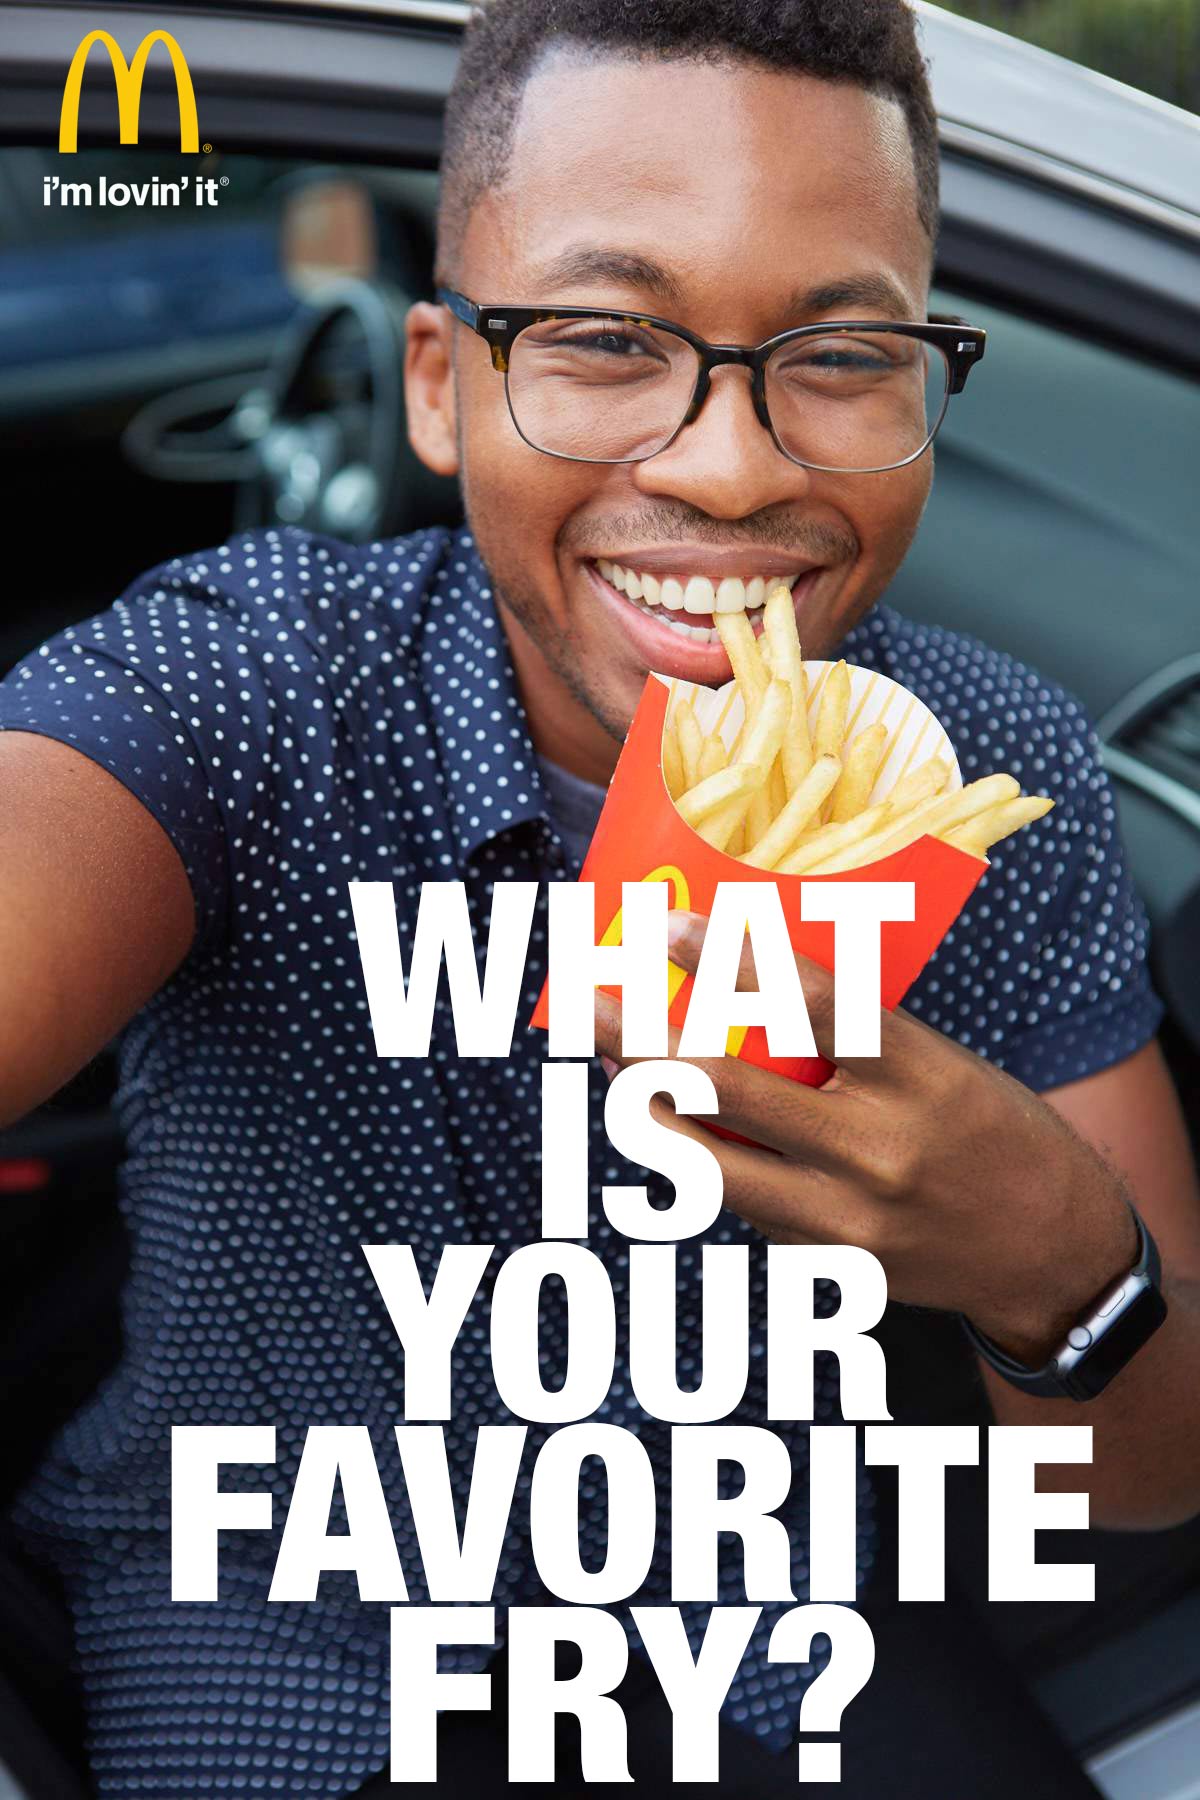 Lifestyle_Advertising_Photographer_Chicago_LA_Los_Angeles_Young_Fun_Advertising_Millennials_Eat_Fast_Food_French_Friens_Burgers_Car_Road_Trip_African_Amercian_Mike_Henry_Photo